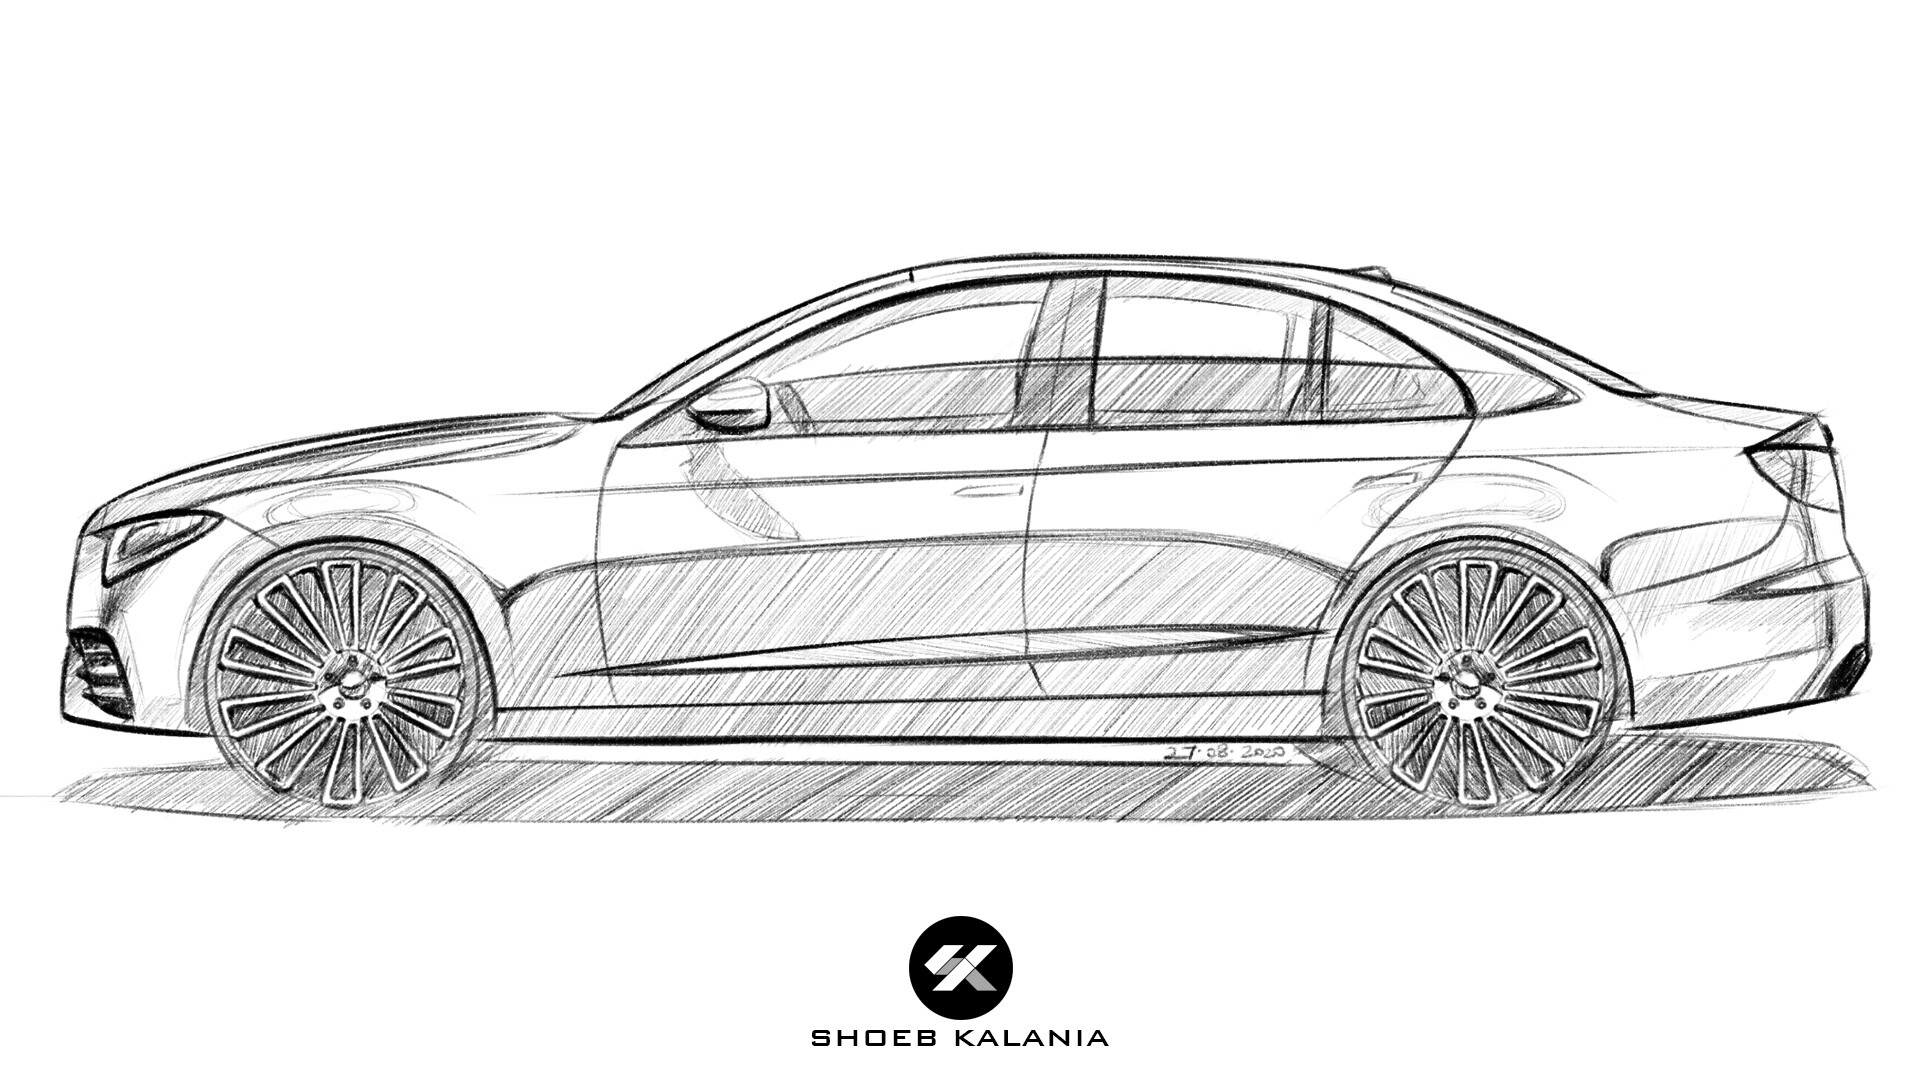 Mercedes Benz CL 63 AMG Realistic Car Drawing by MaxBechtold on DeviantArt